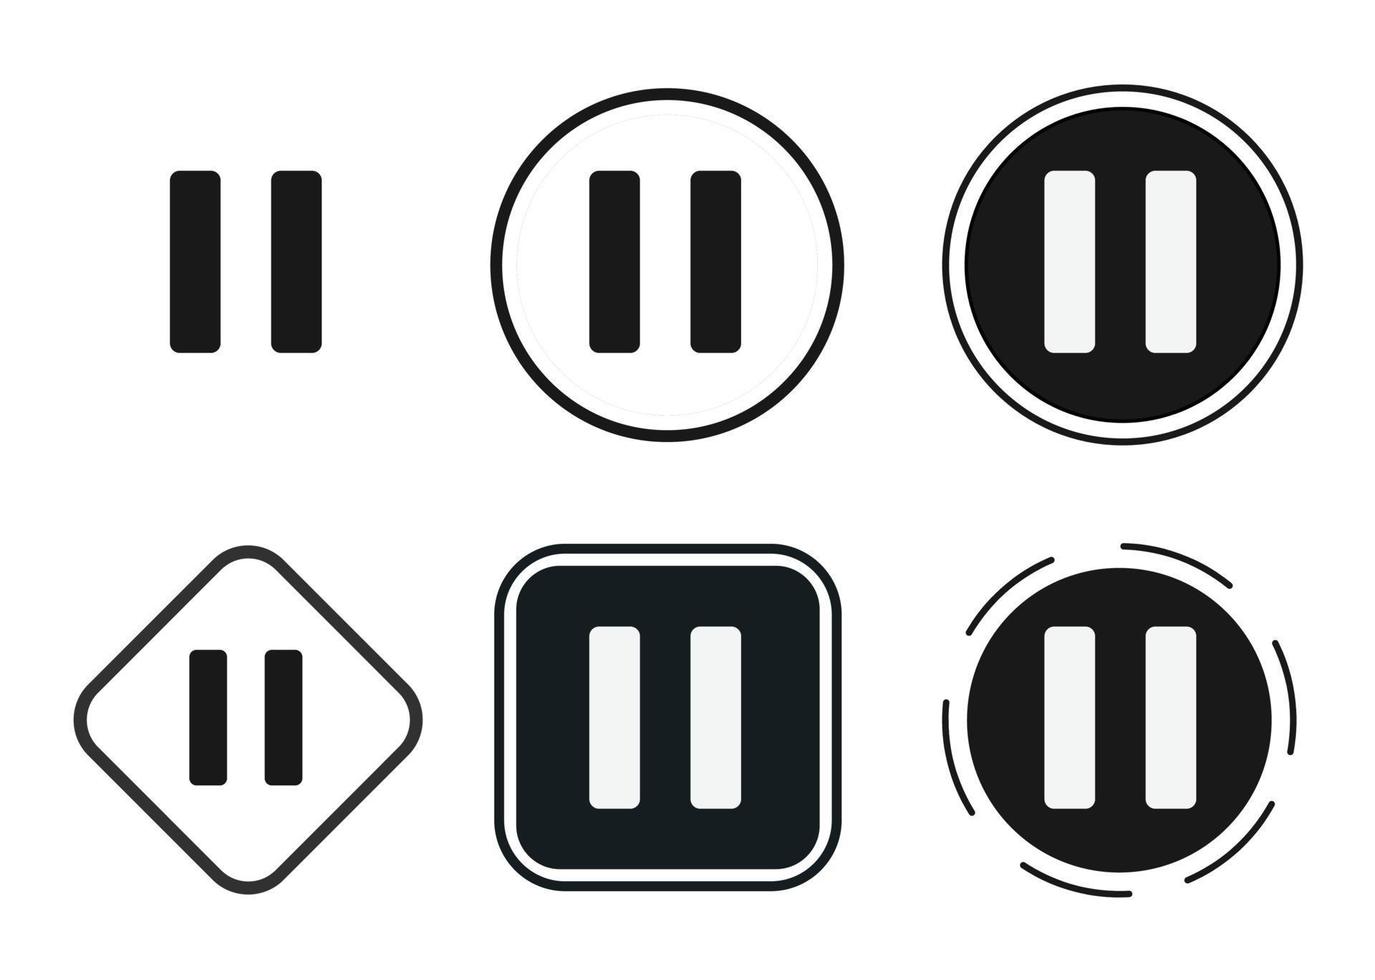 pause icon . web icon set . icons collection flat. Simple vector illustration.